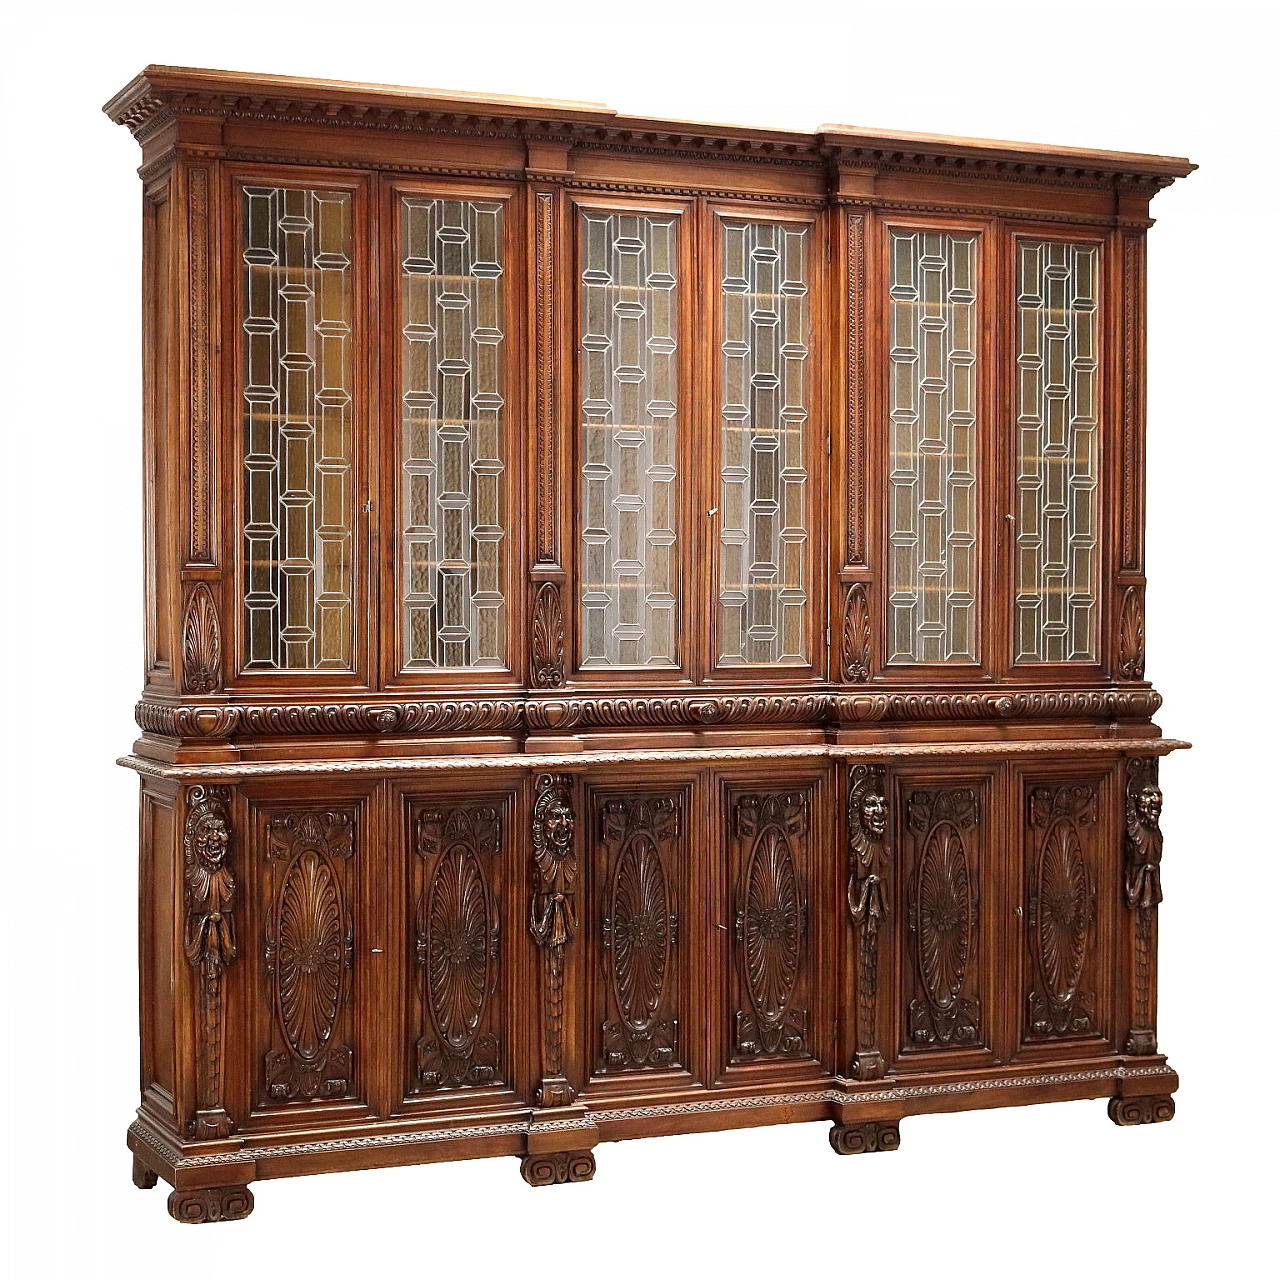 Carved walnut bookcase with leaded glass doors, 19th century 1